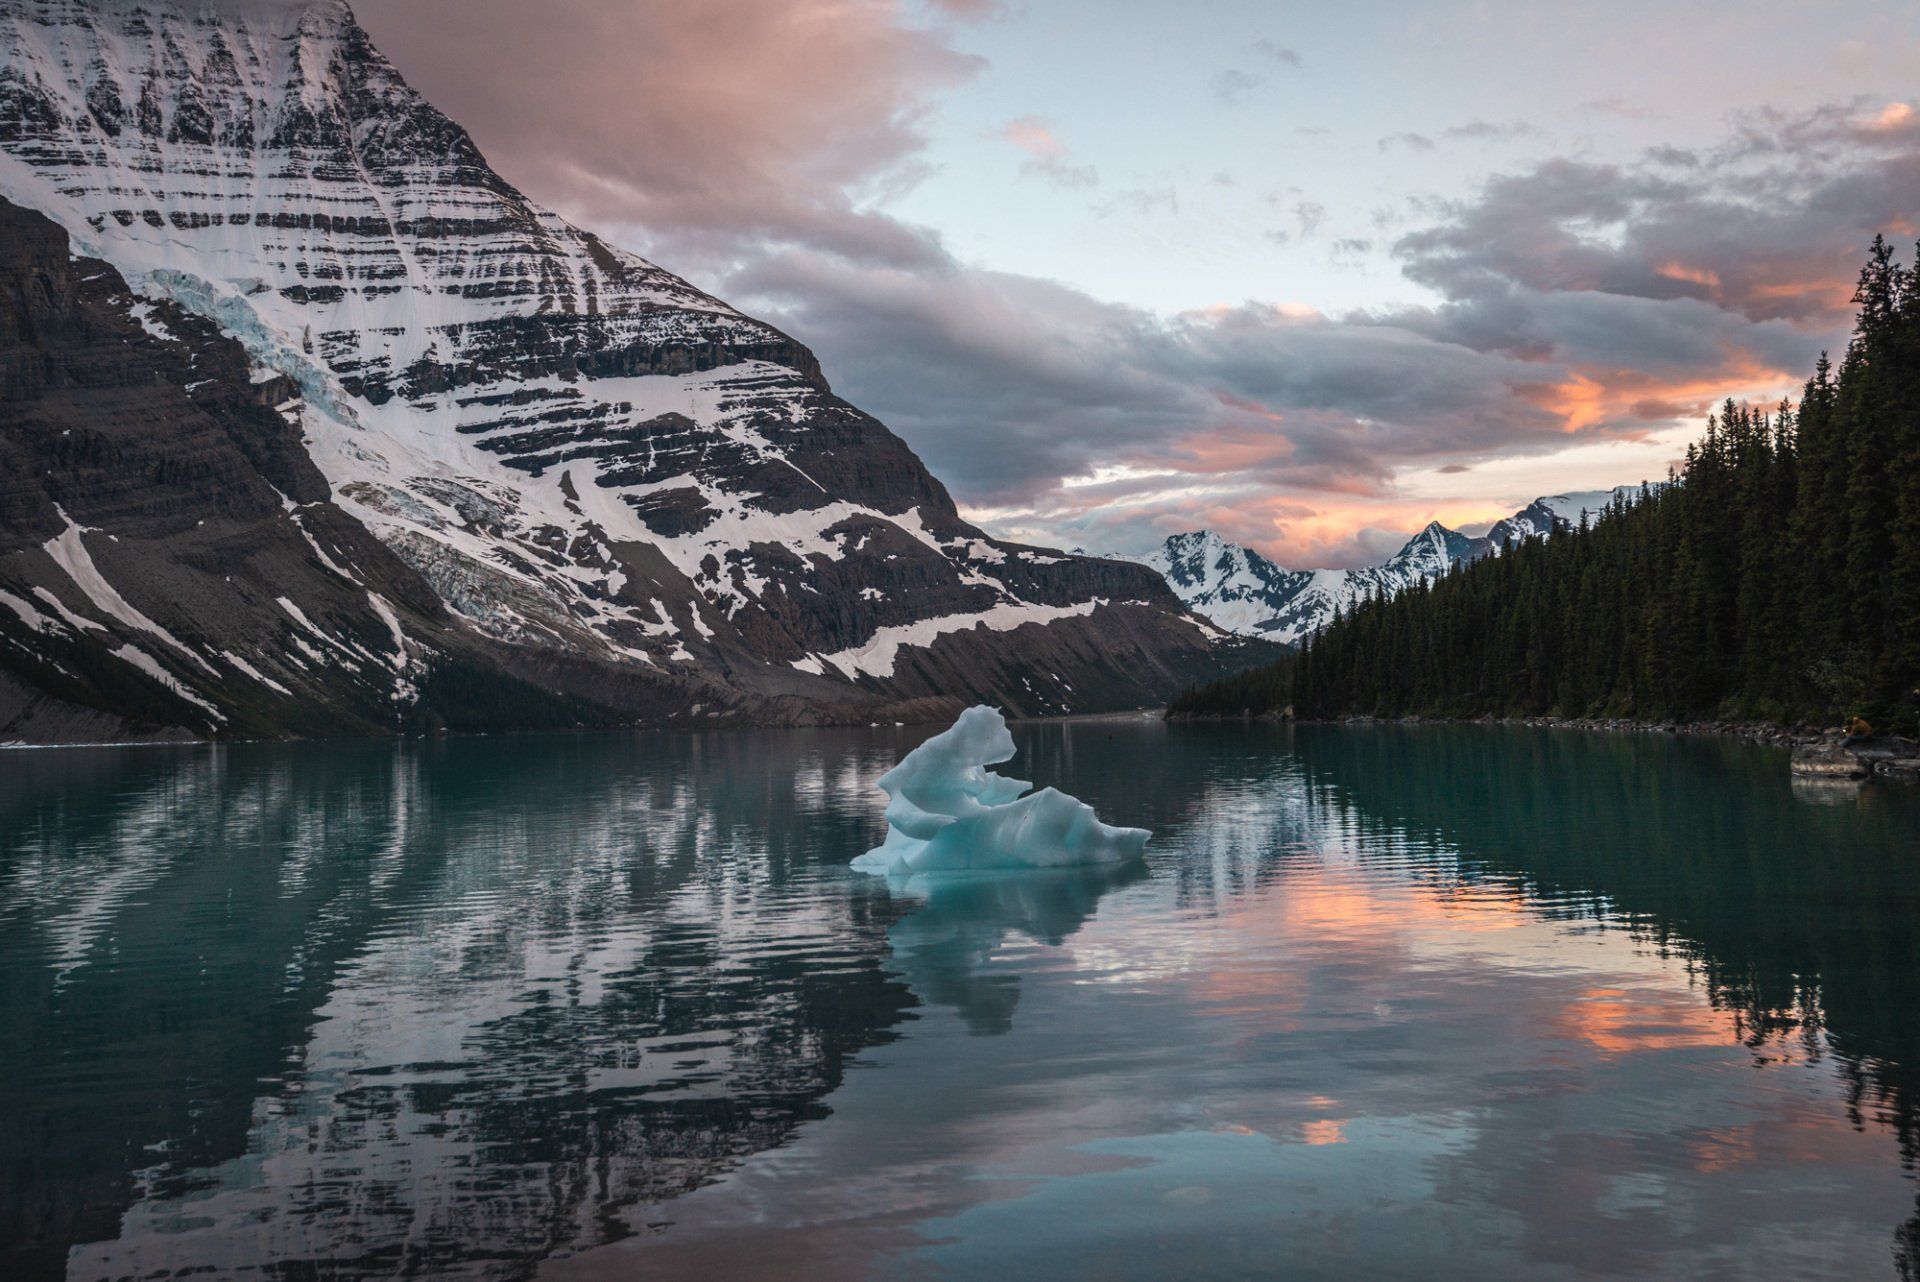 Sunset on Berg lake, mt Robson park, BC, Canada. Turquoise lake and mountains touched with first rays of morning sun